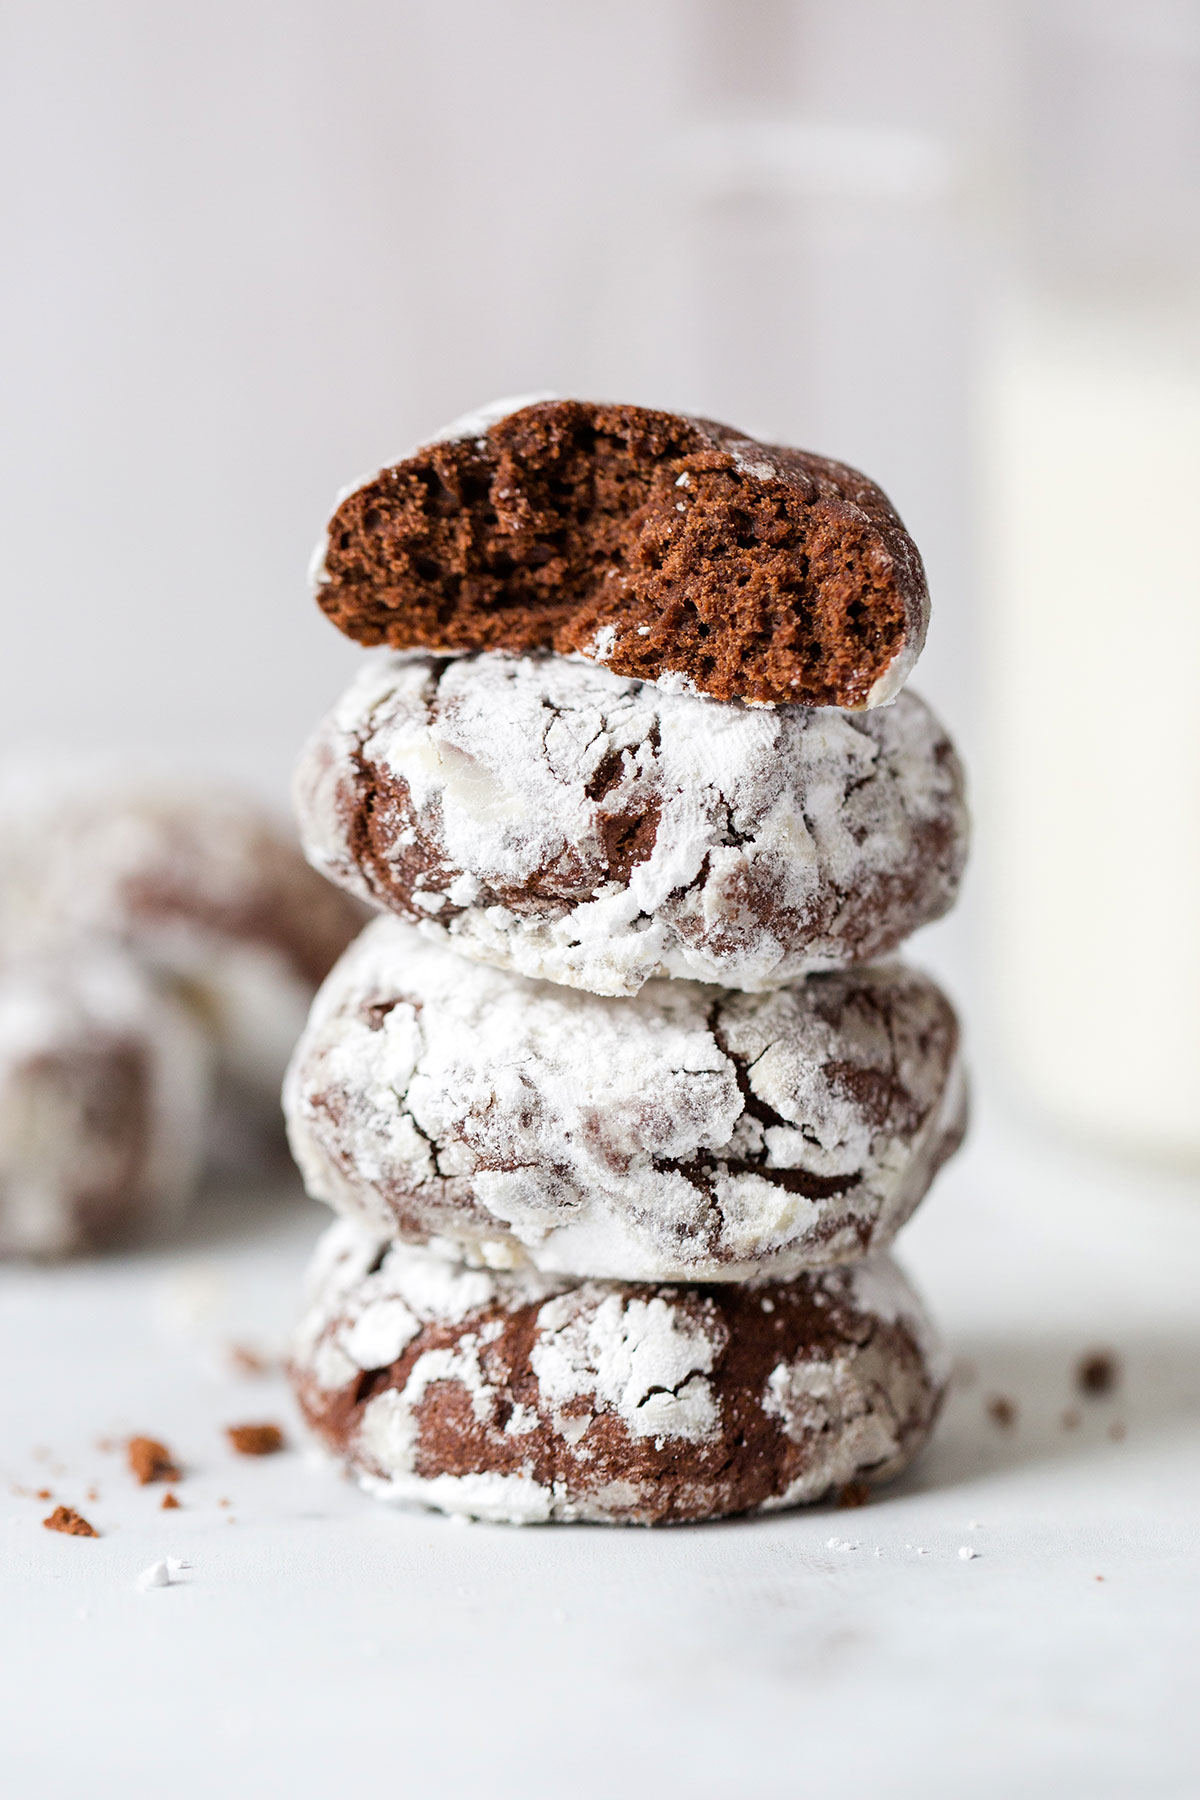 A stack of Chocolate Crinkles with the top cookie broken open to reveal the fudgy interior